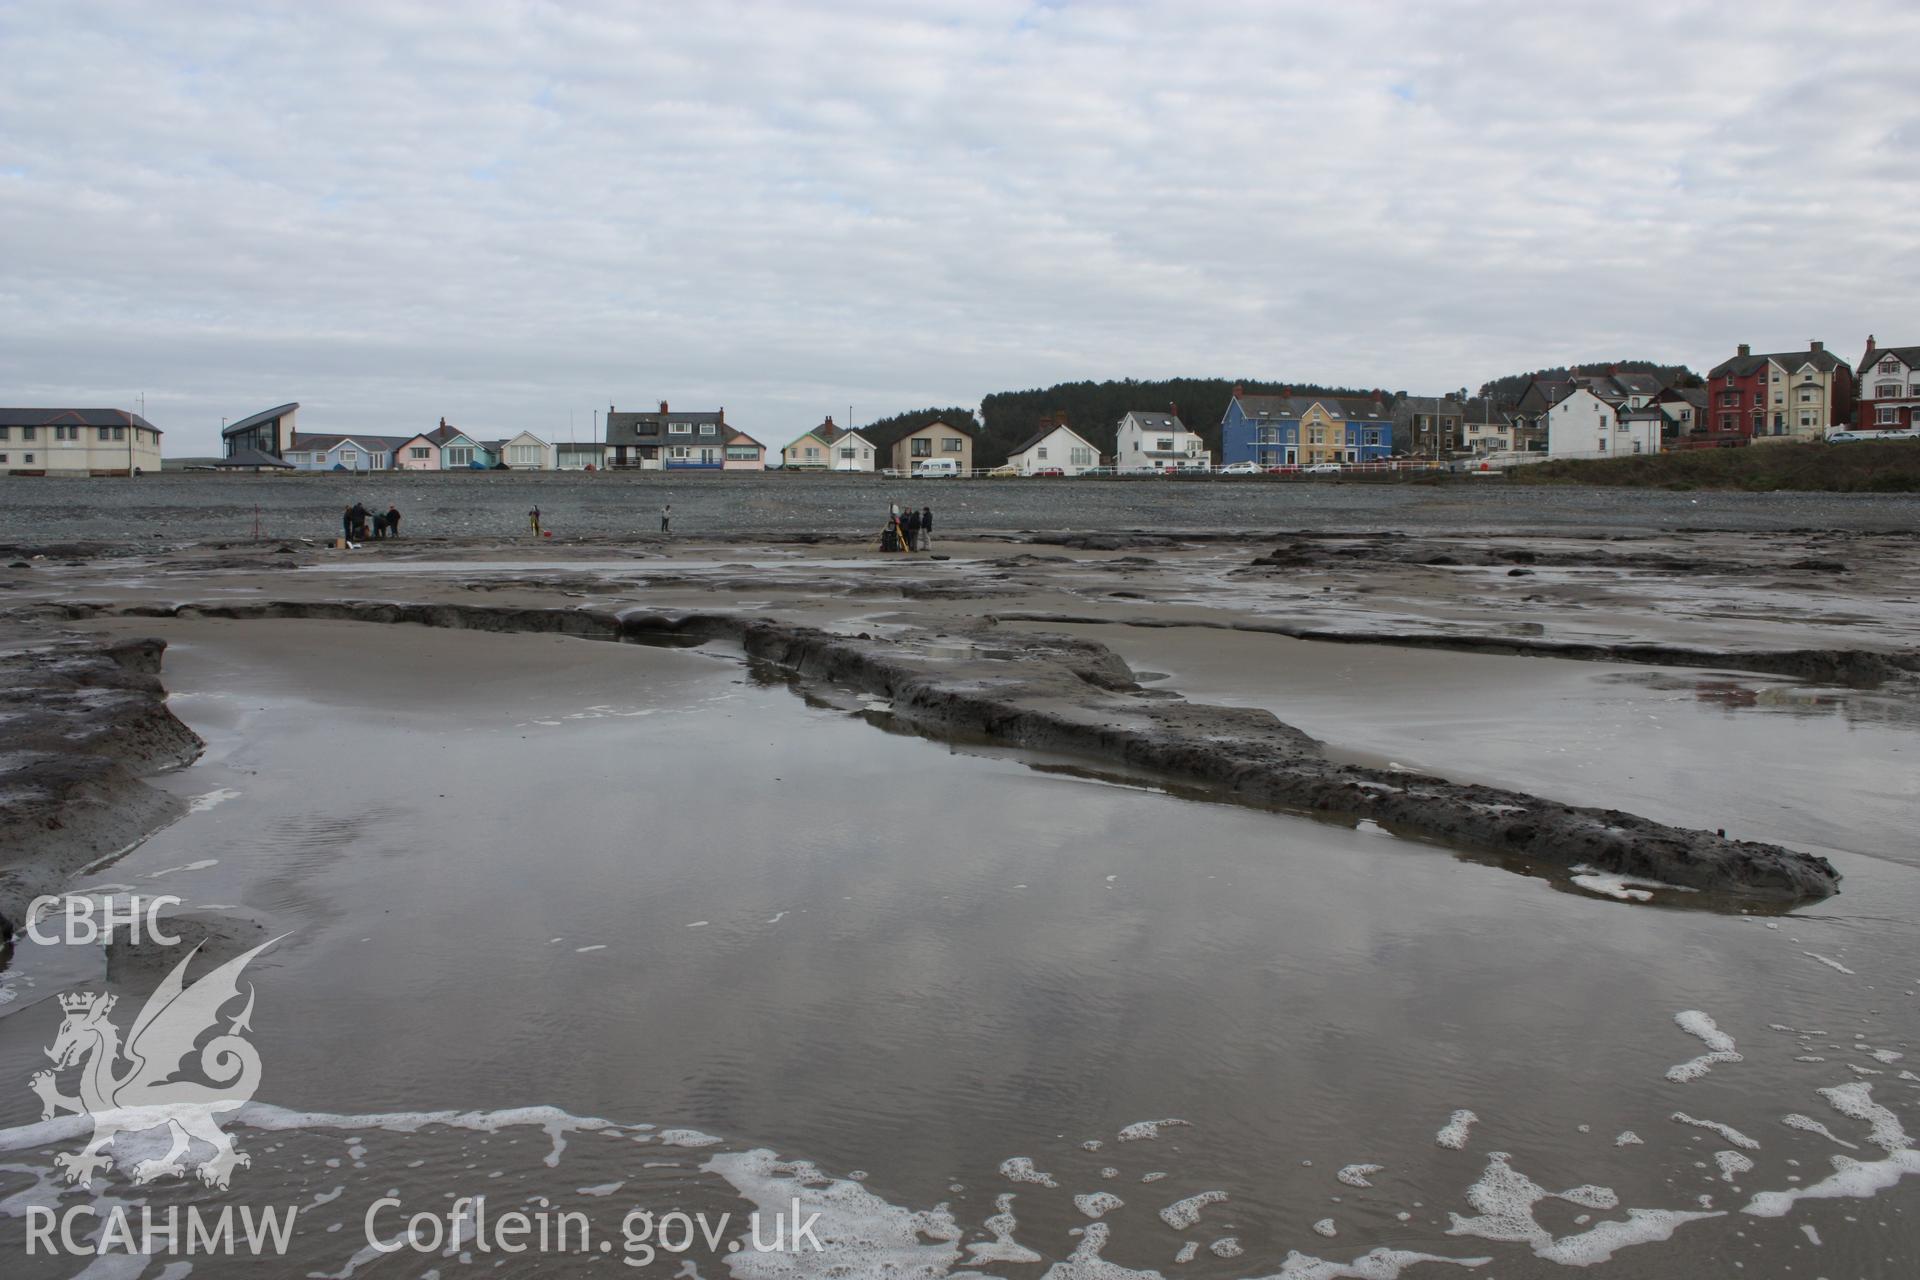 Borth submerged forest (between RNLI lifeboat station and upper Borth), looking east towards High Street. Showing peat exposures below lifeboat station at low tide